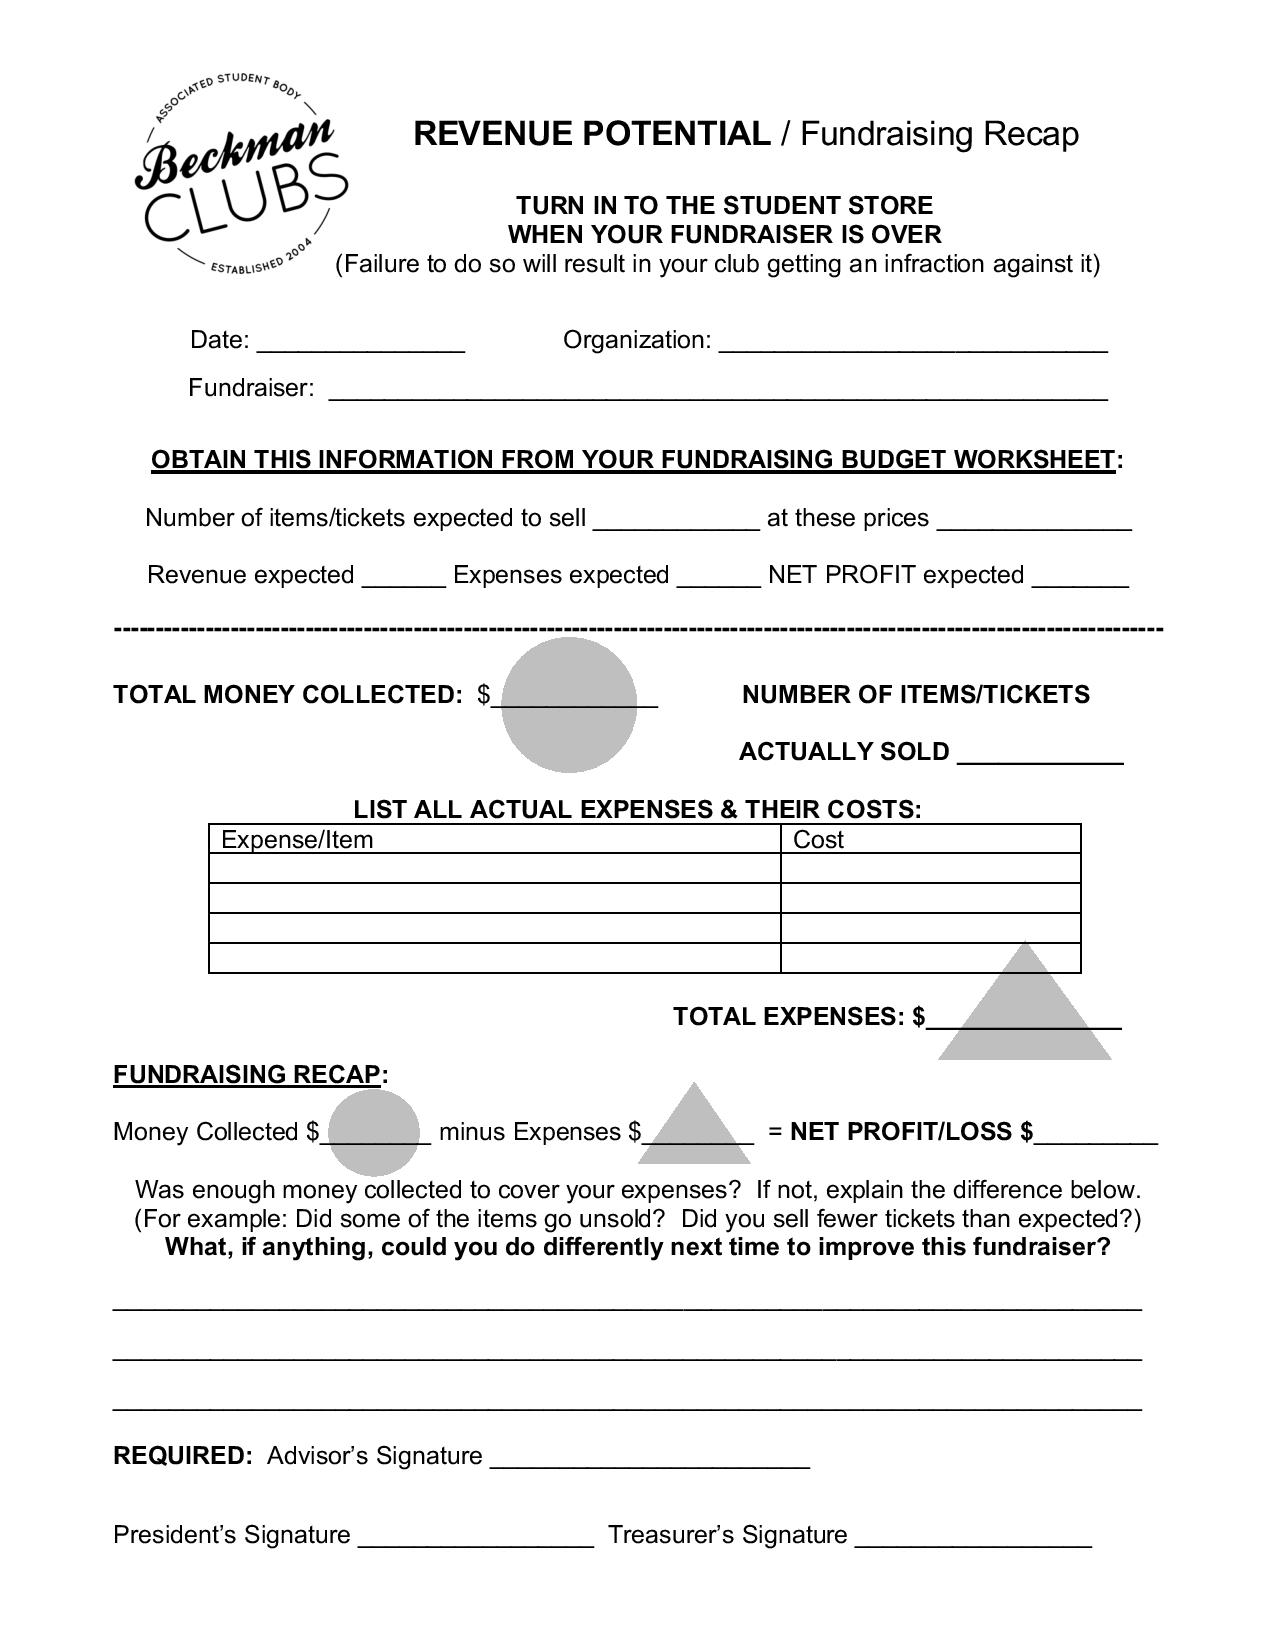 ClubsFundraiserPacket-page-007.jpg